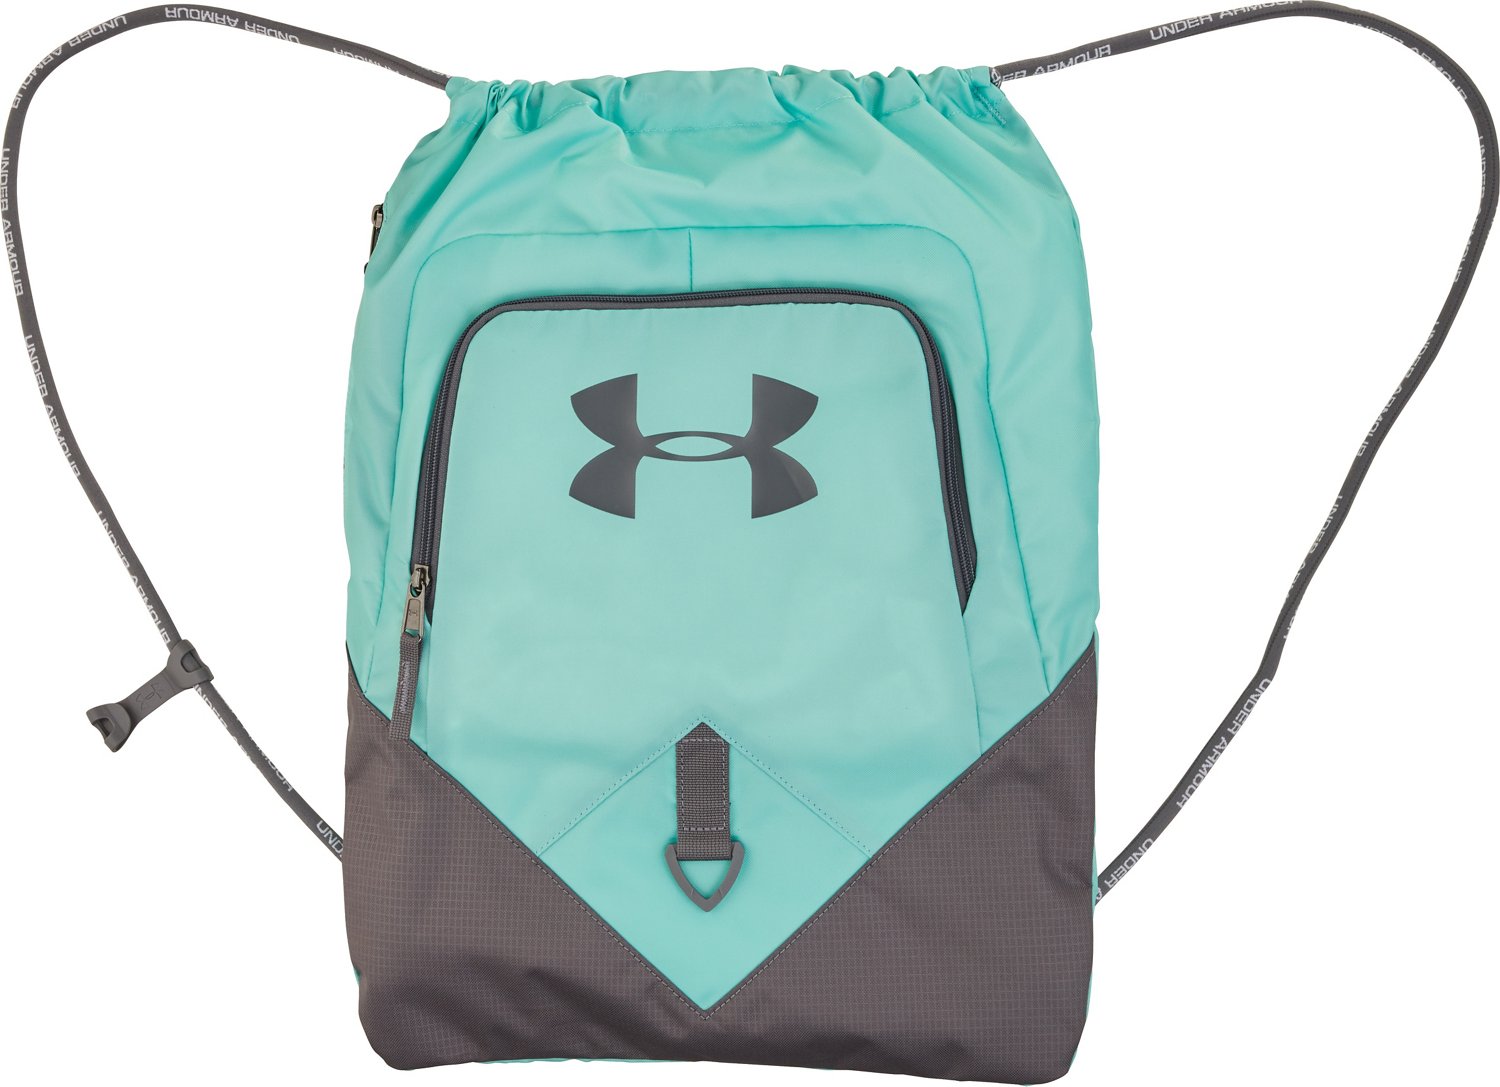 under armour drawstring backpack